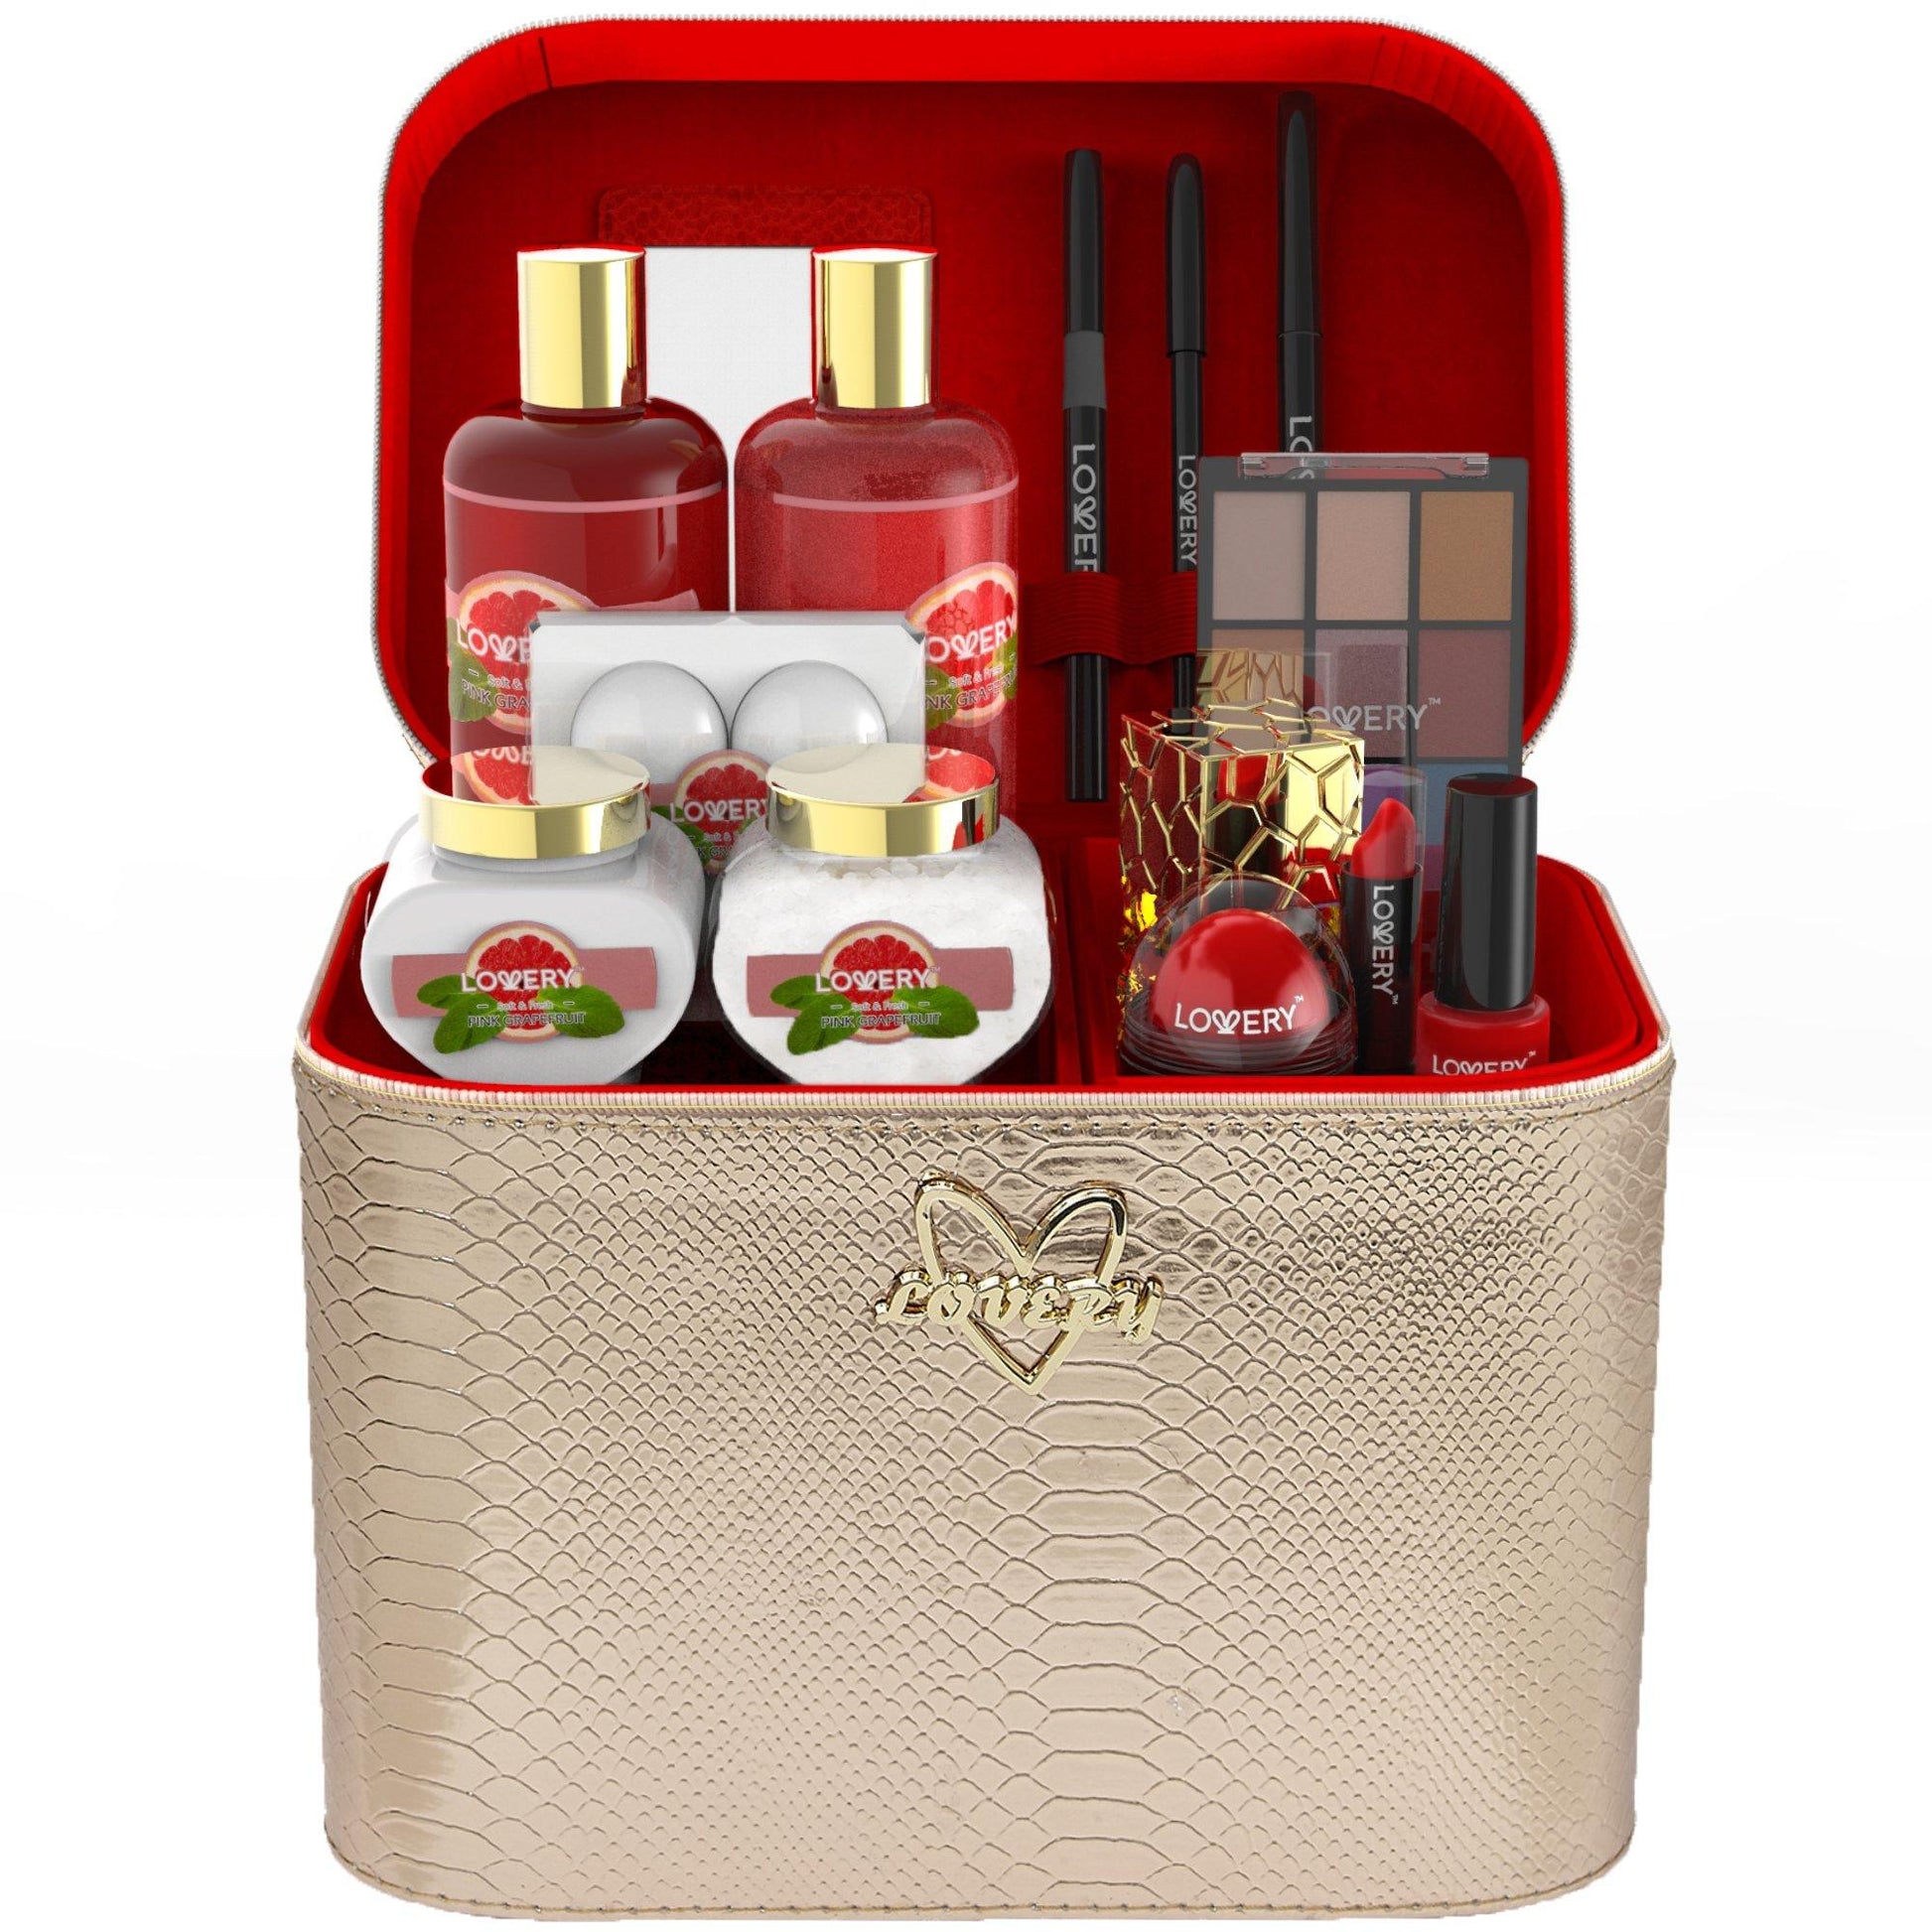 Mother's Day Gift Makeup Gift Baskets for Best Friend,Spa Gift for